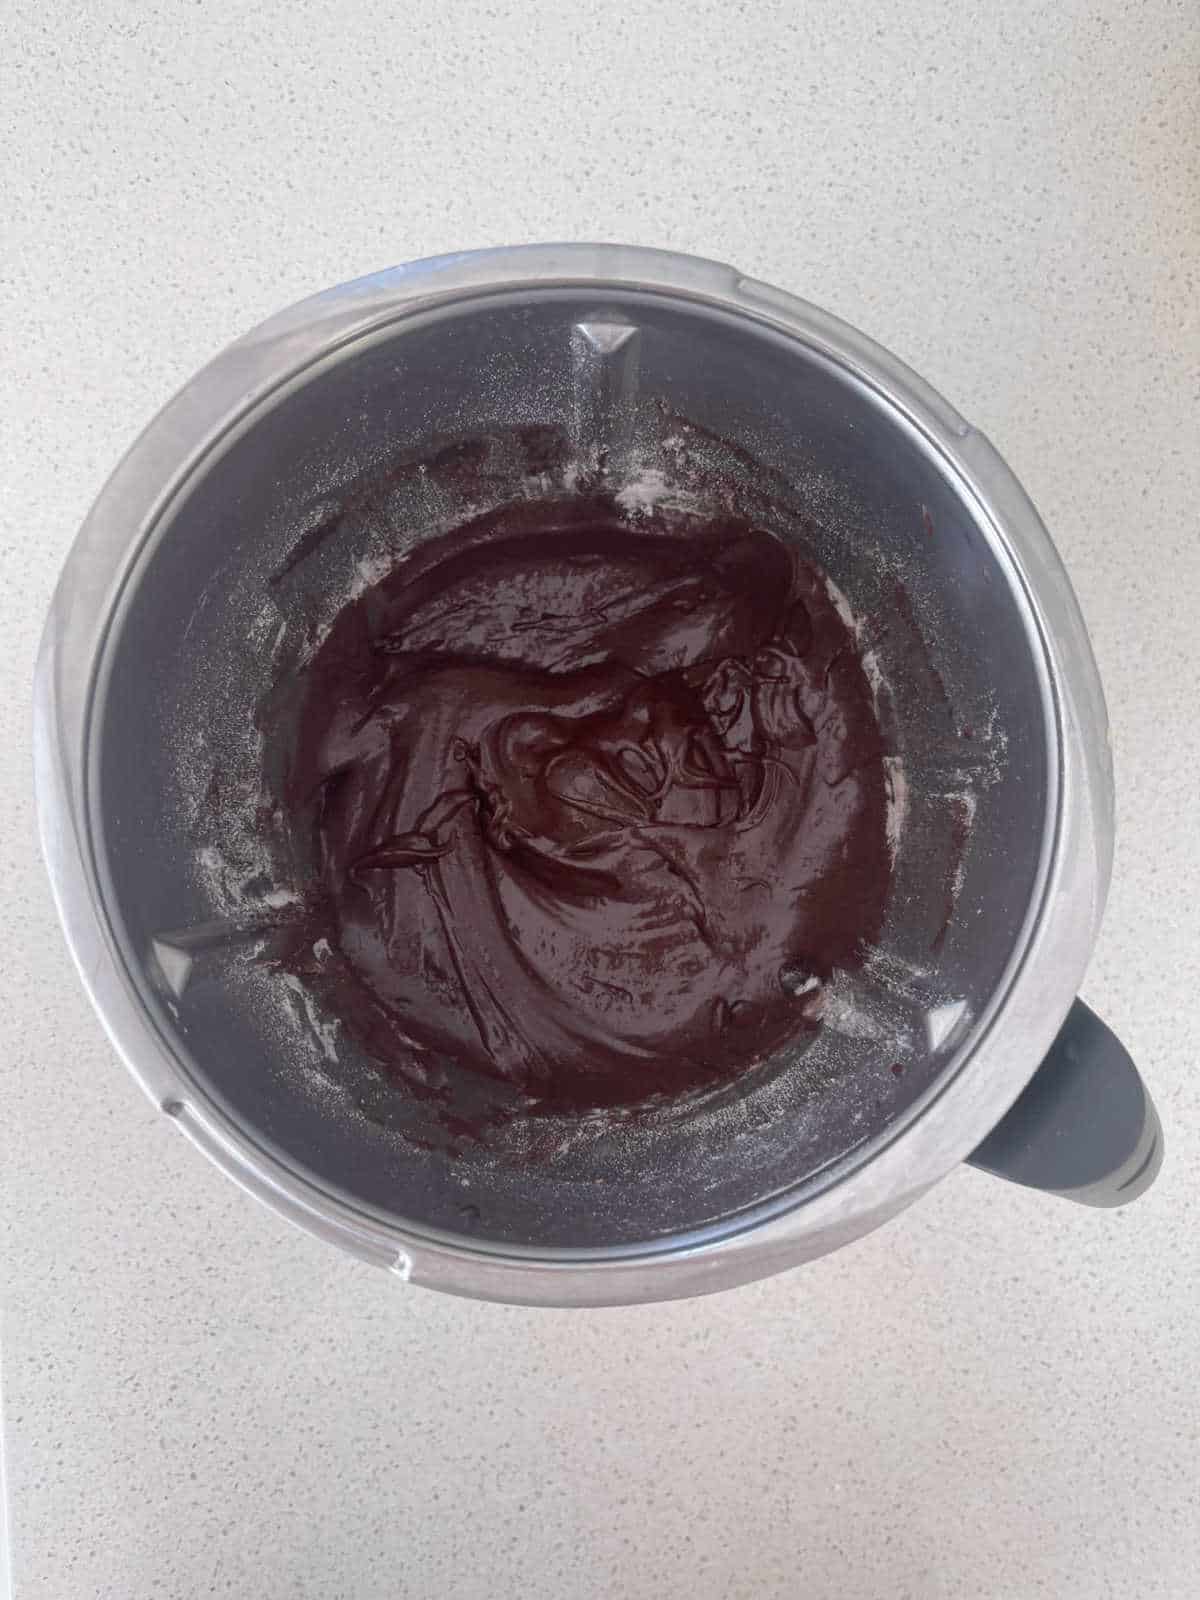 Brownie ingredients melted together in a Thermomix bowl.